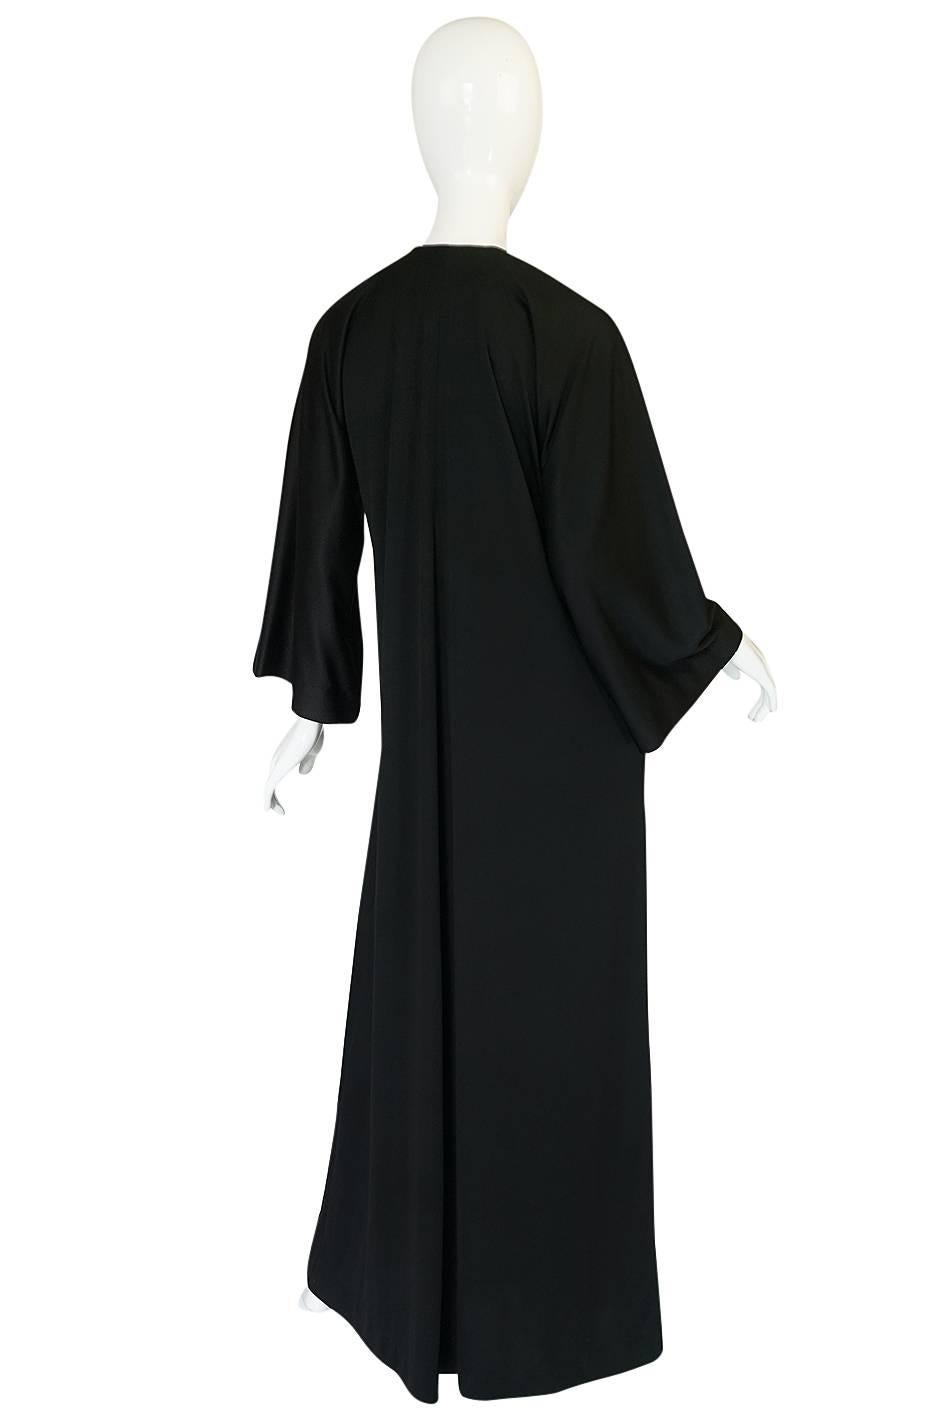 This Halston IV caftan, is a made from an easy to care for, easy to wear black jersey that you can wash and wear. The simple, classic design makes it is an easy way to be instantly dressed up and still entirely comfortable. These easy to wear and